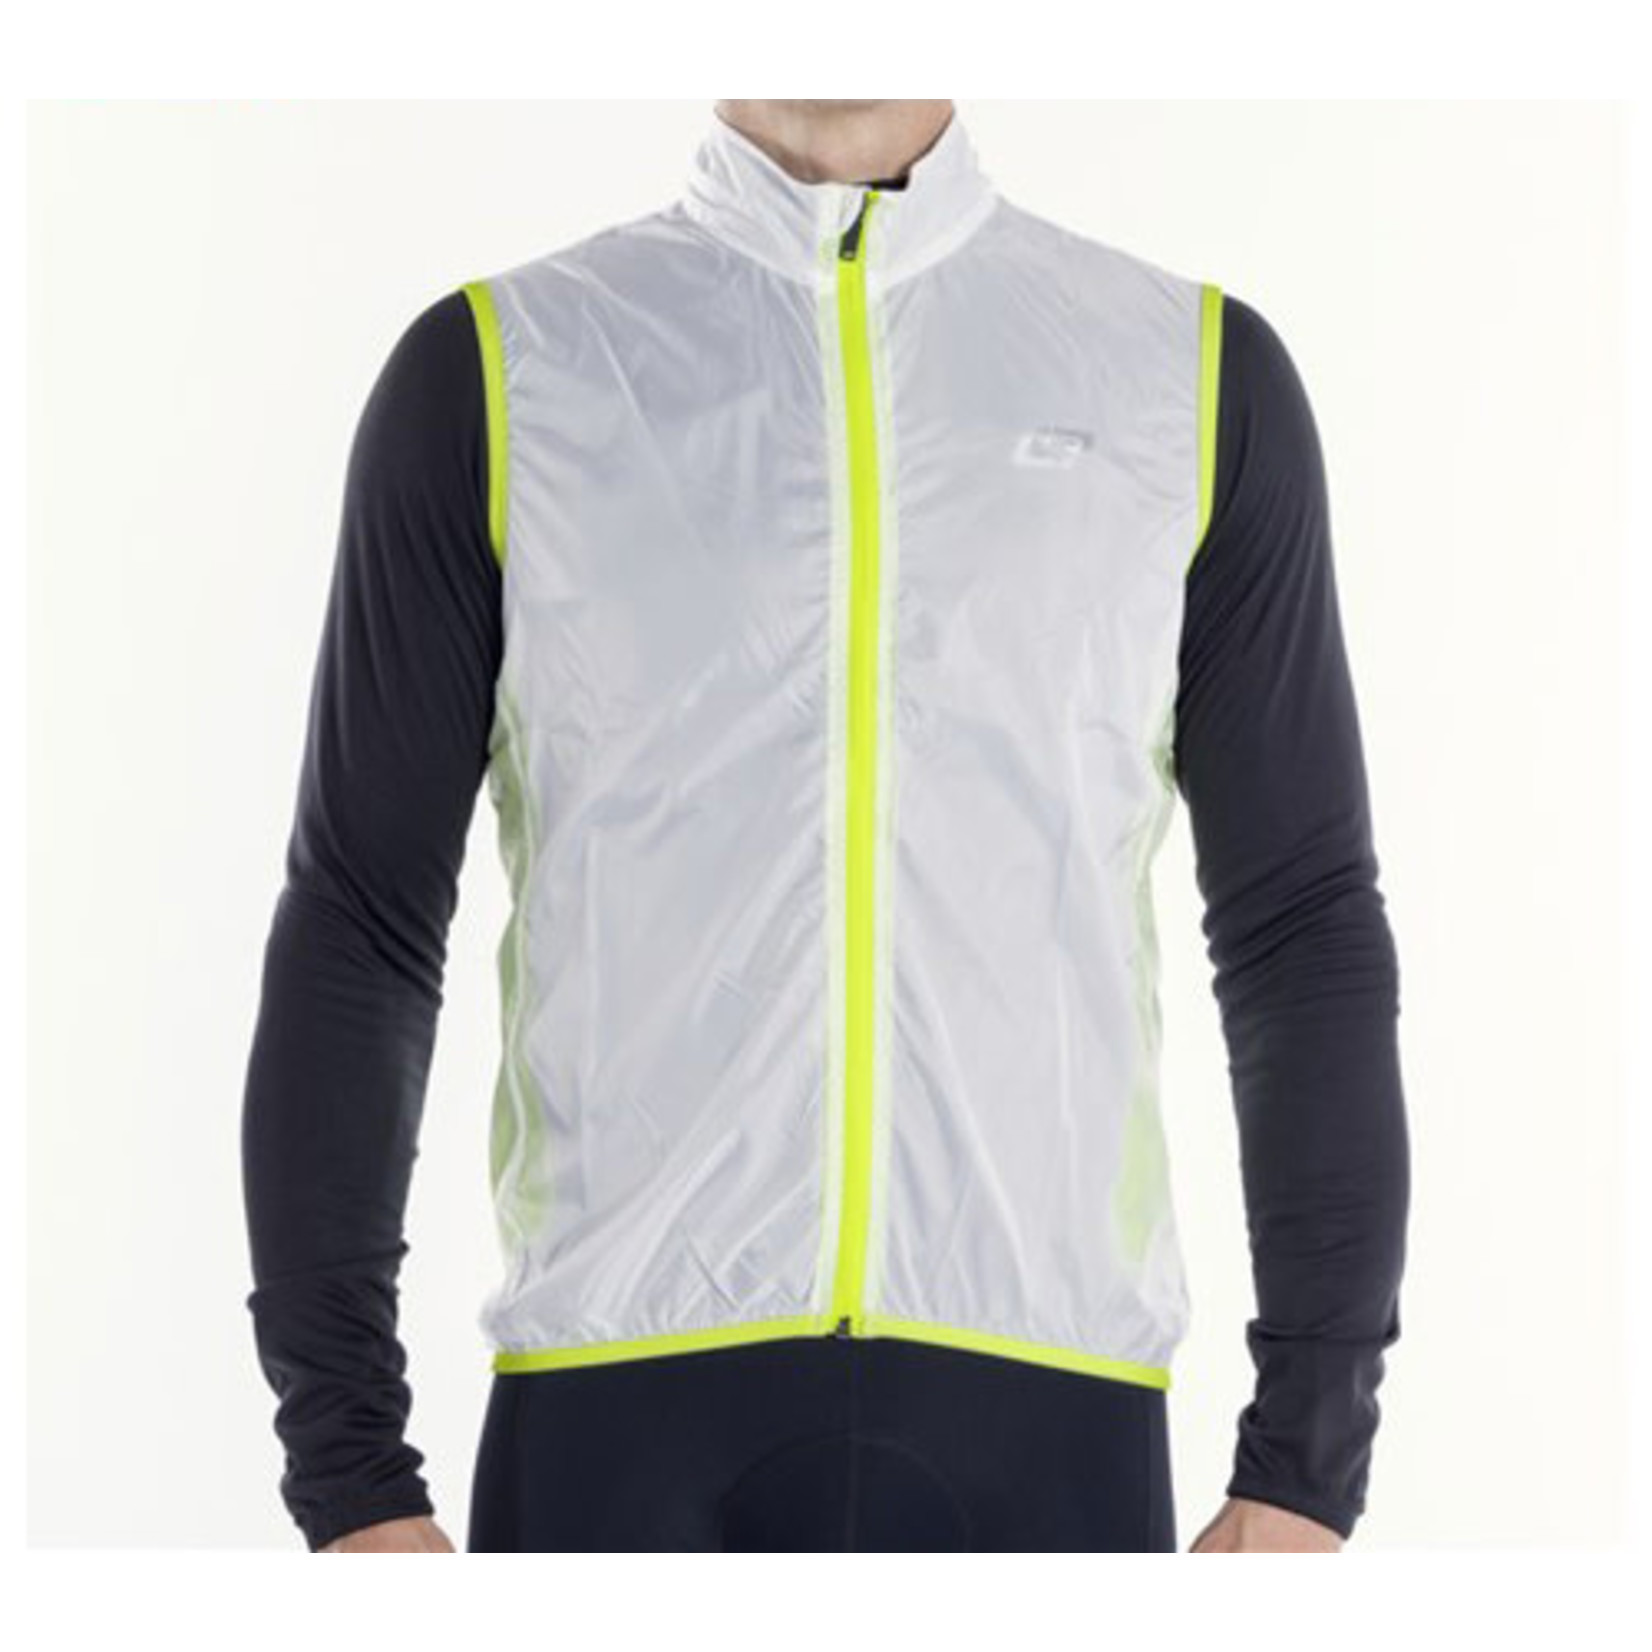 Bellwether Bellwether Ultralight Vest - White - X-Large